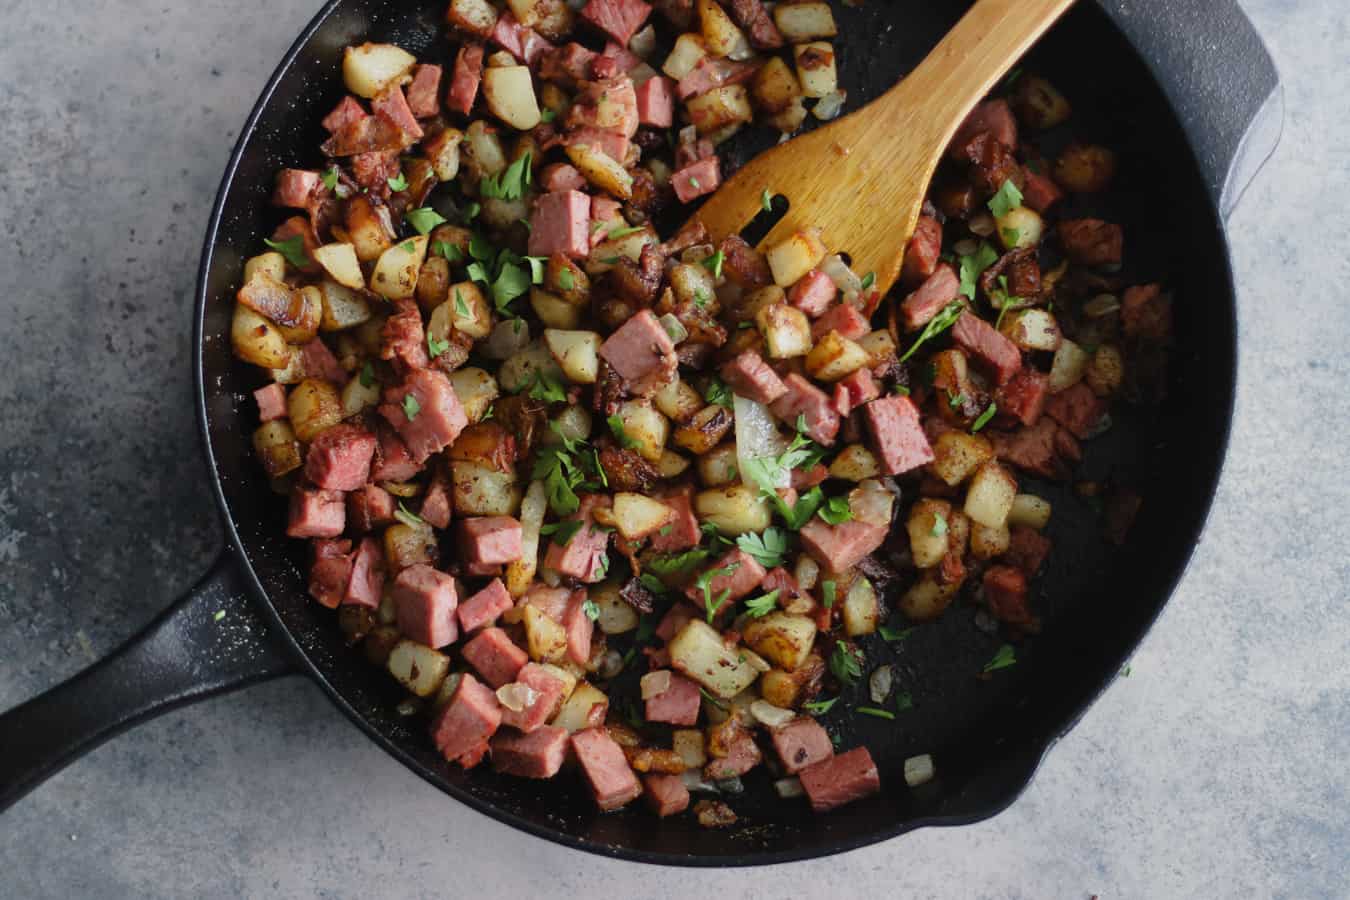 How to make corned beef hash in a skillet